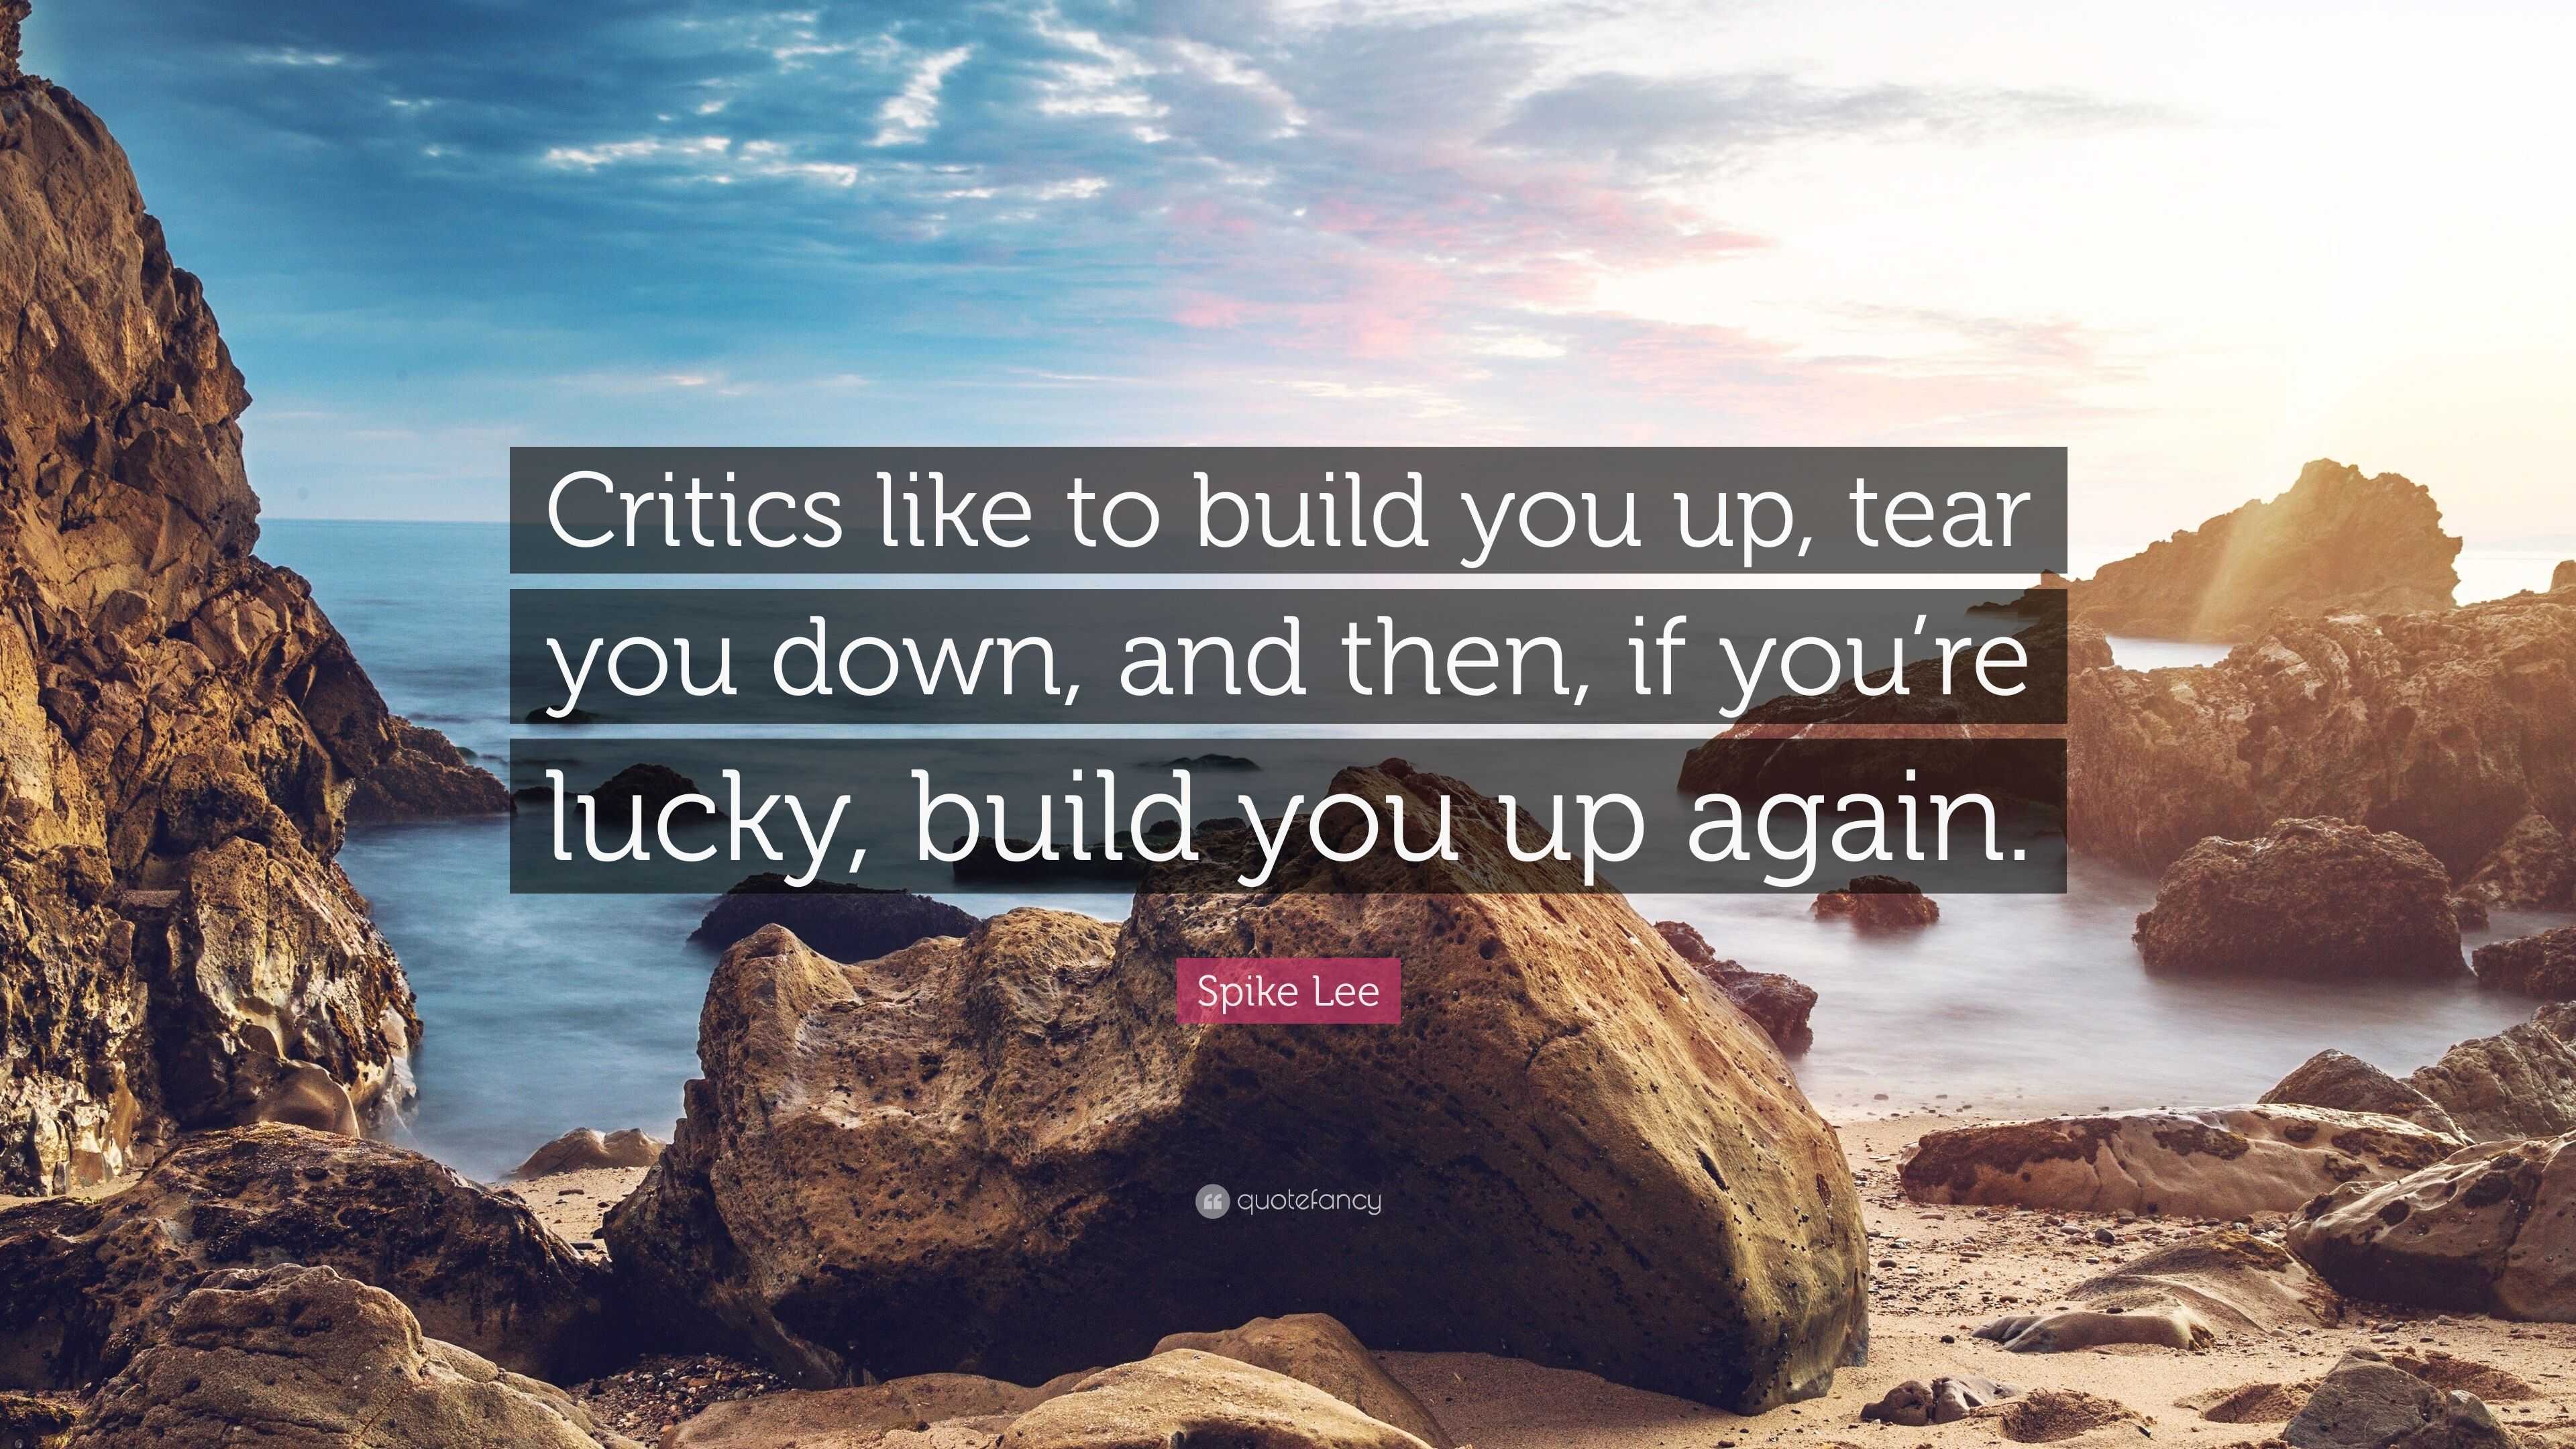 Spike Lee Quote: “Critics like to build you up, tear you down, and then, if  you